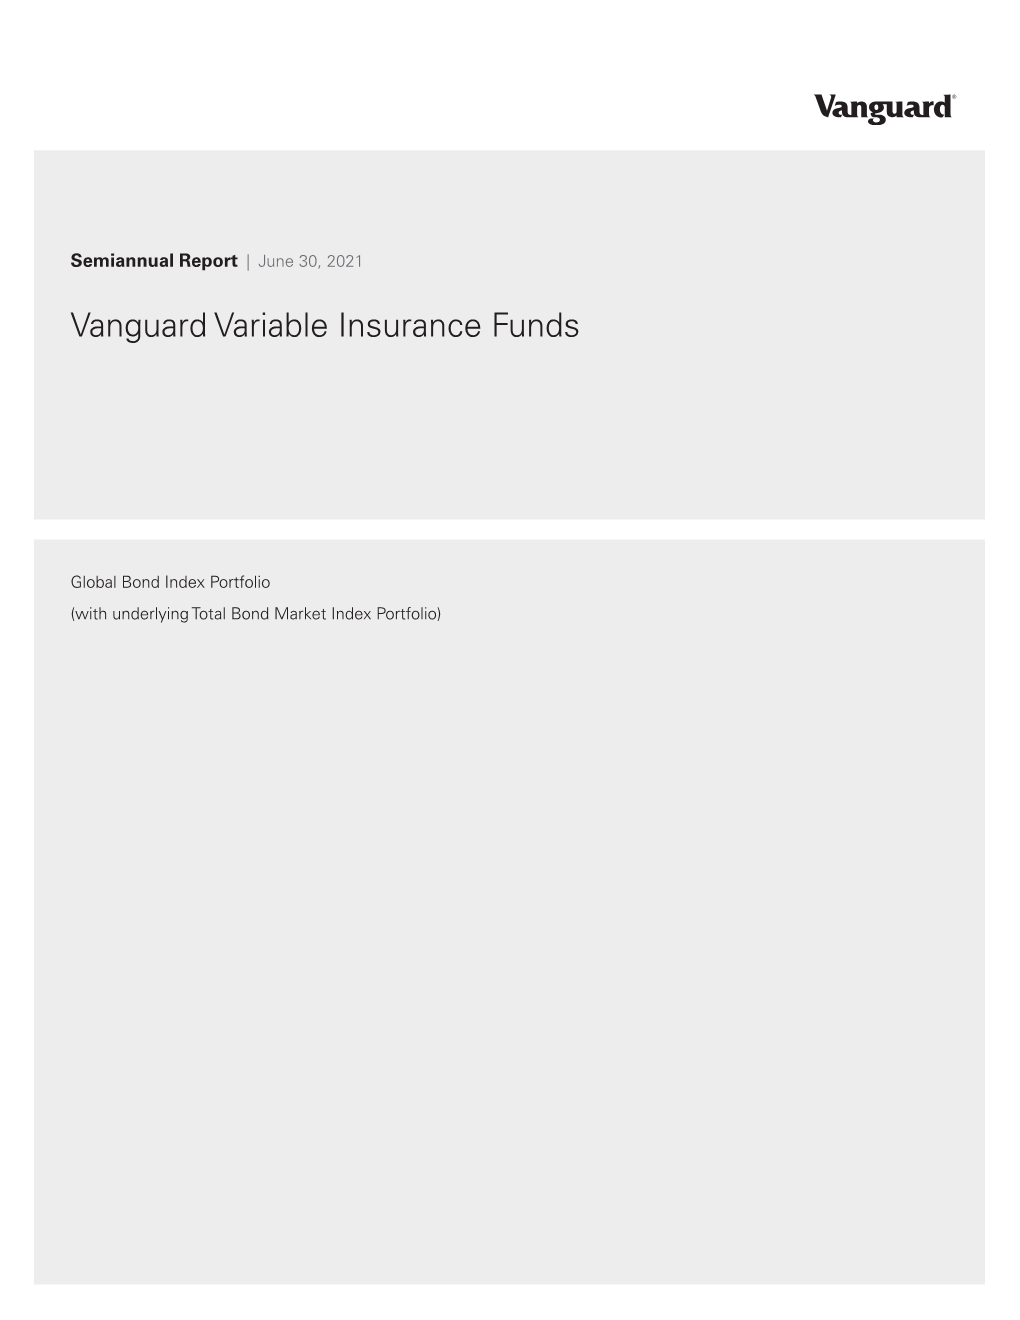 Vanguard Variable Insurance Funds